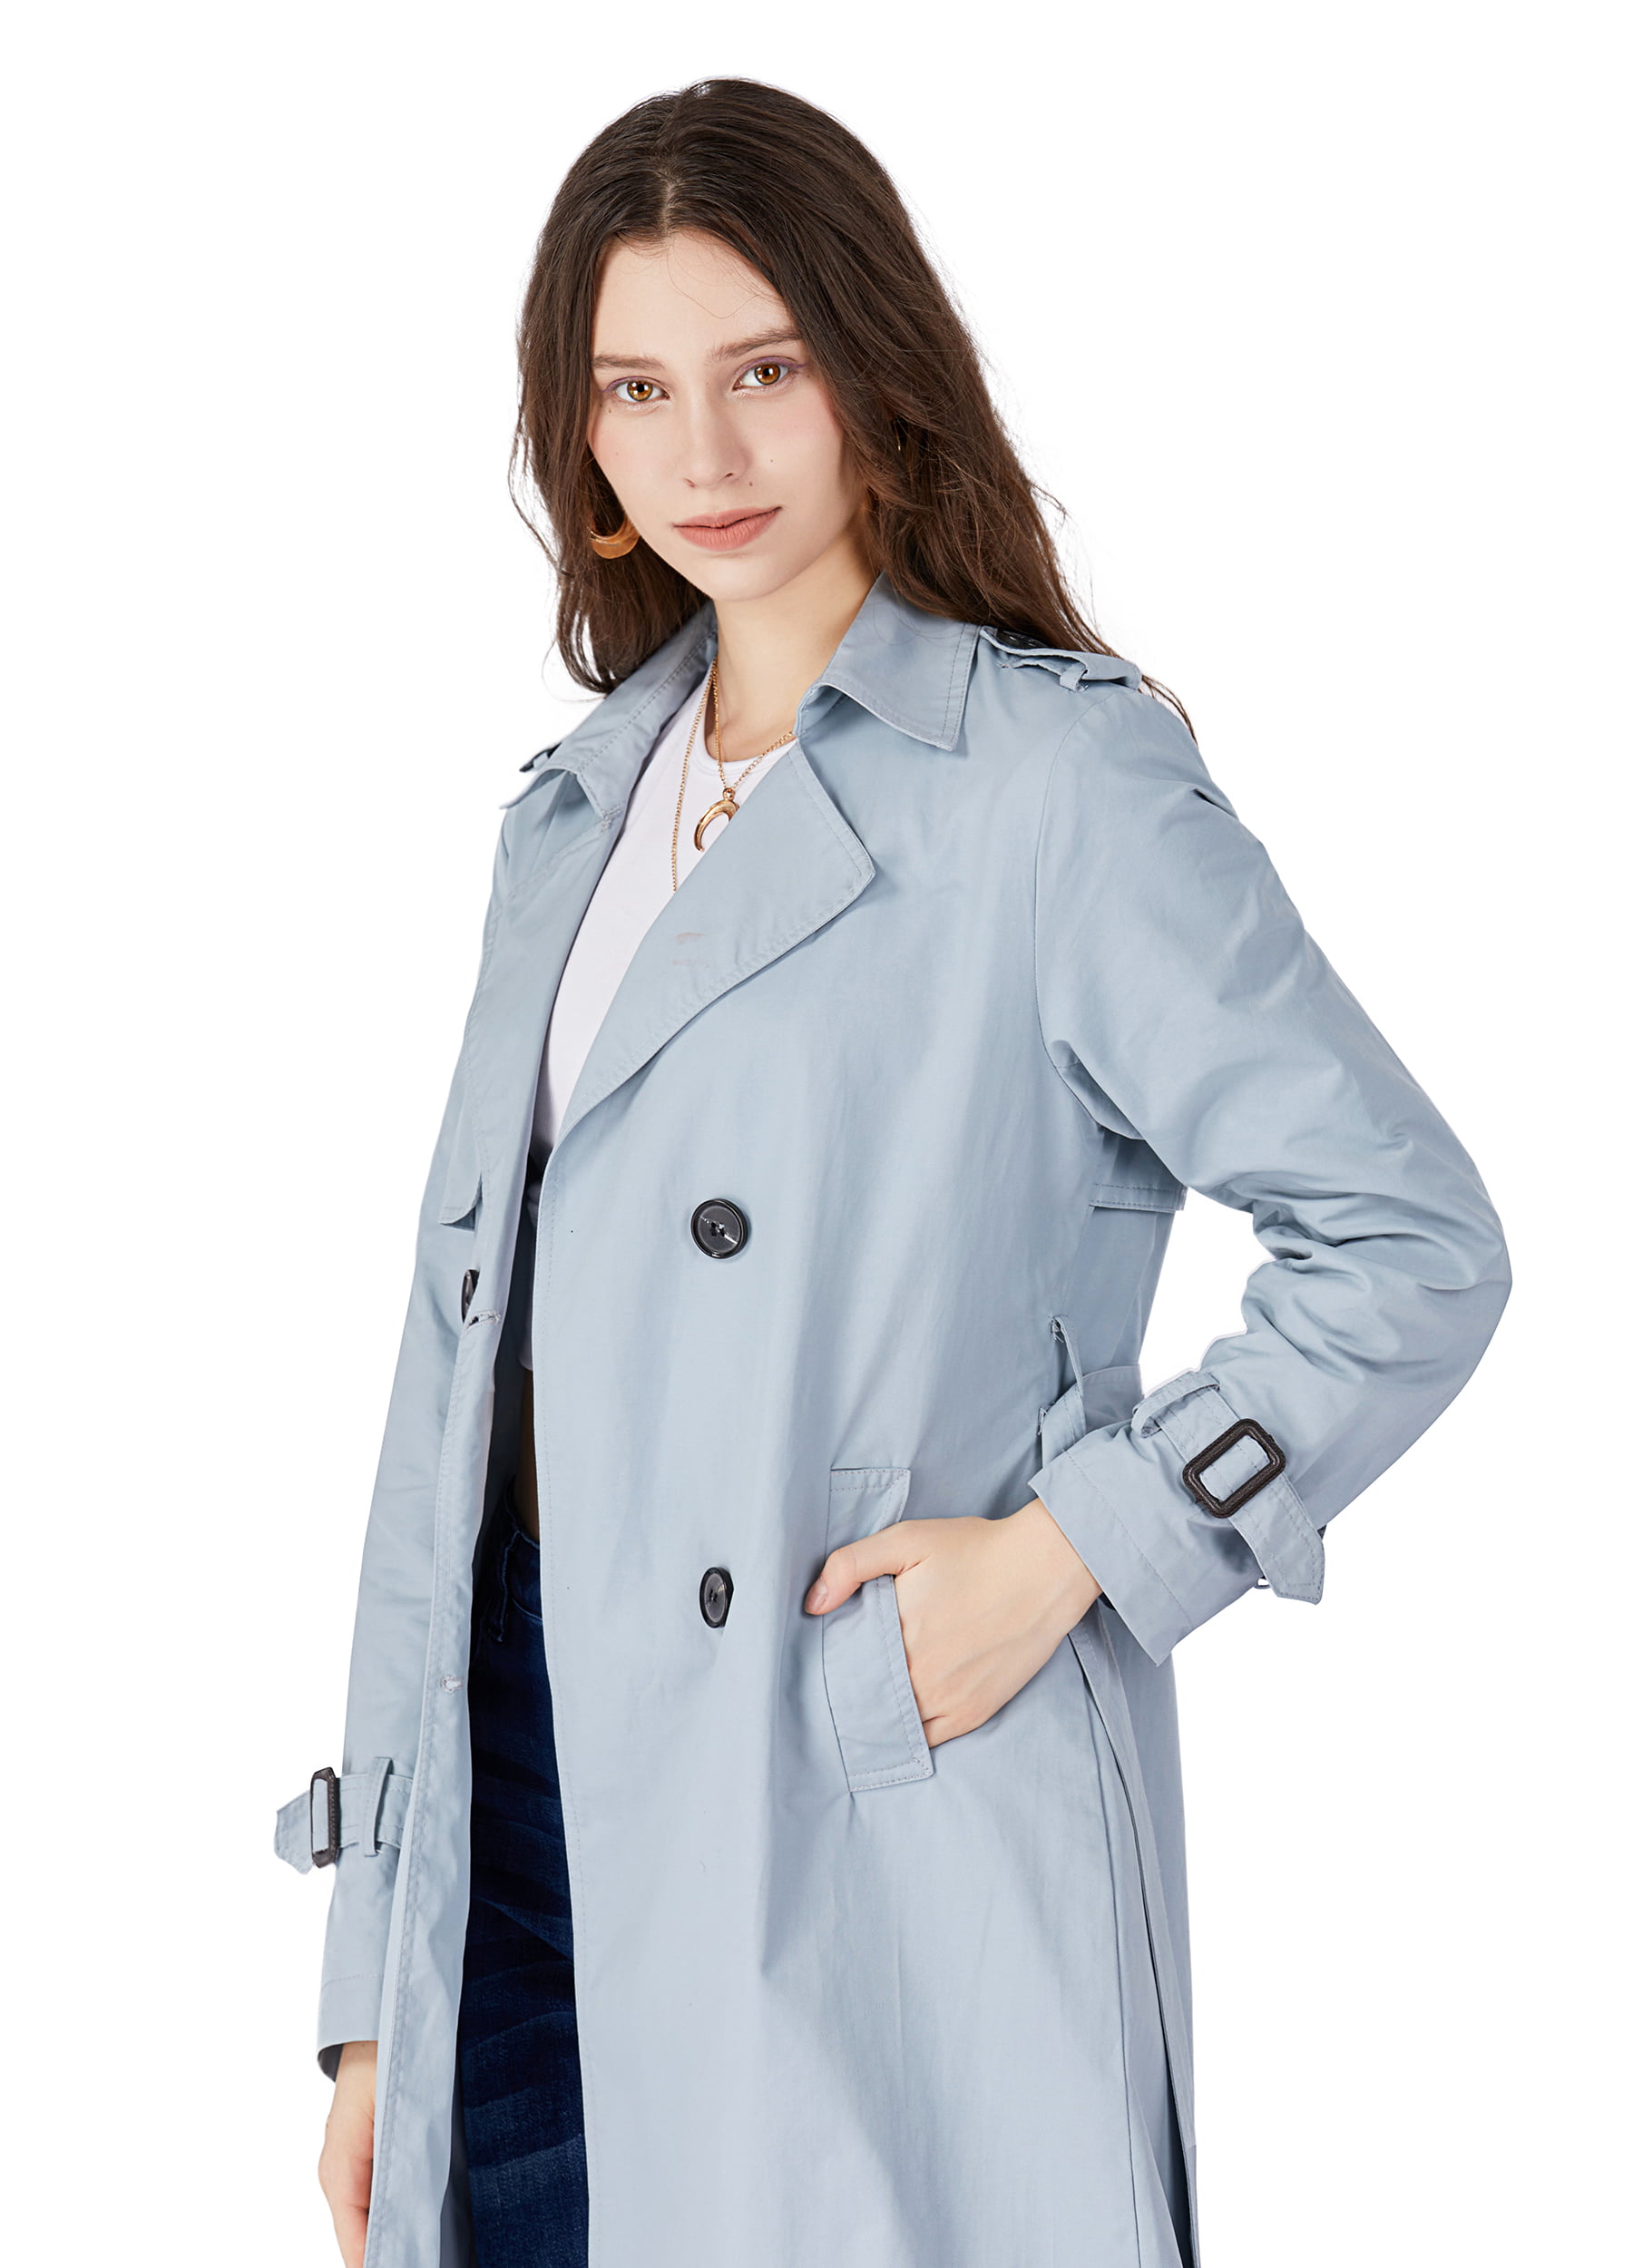 MECALA Womens Double Breasted Trench Coat Buckle Belted Jacket 